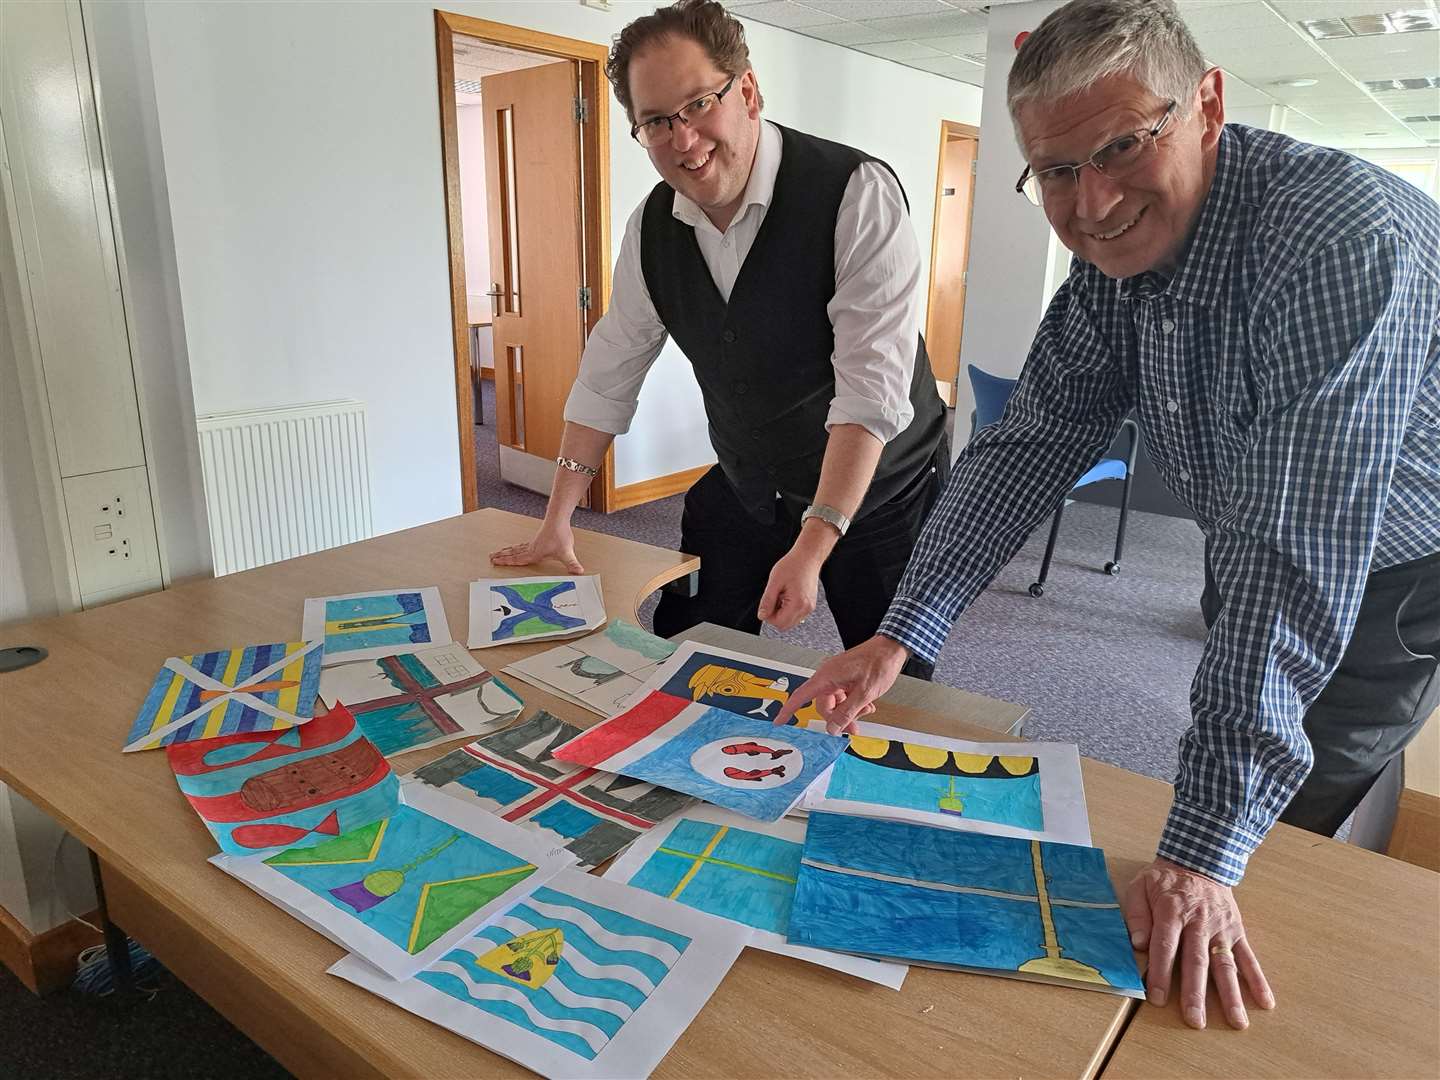 Lord lieutenant of Banffshire Andrew Simpson (right) and vexillologist Philip Tibbetts during the Banffshire flag voting at The Northern Scot office.